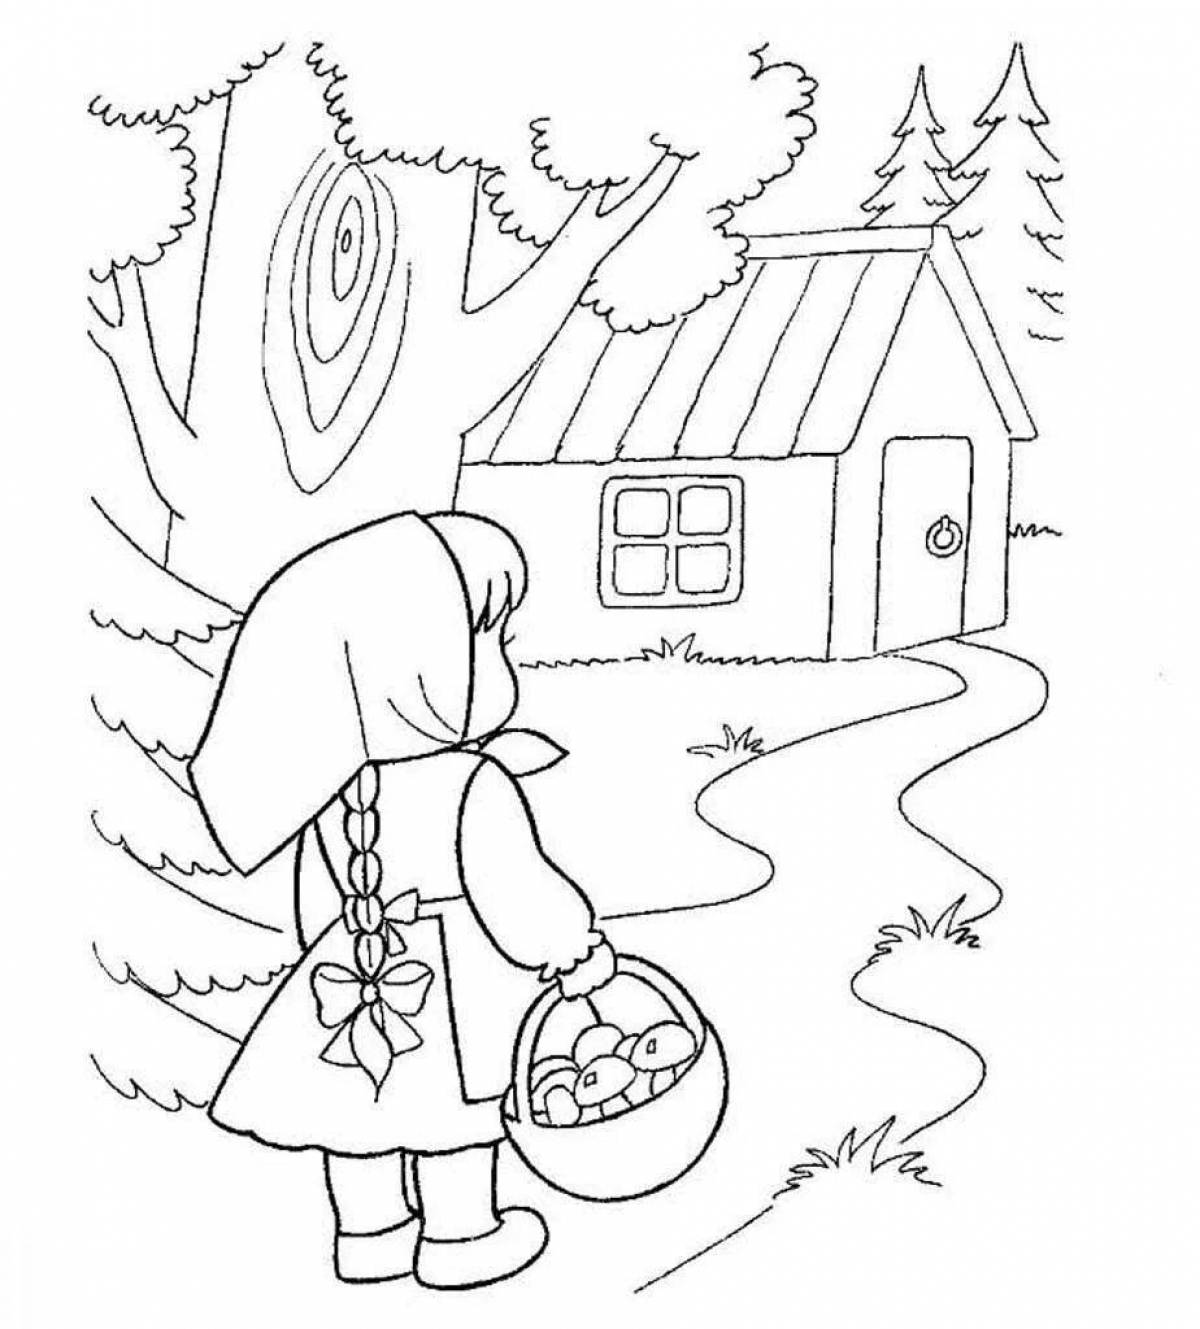 Sublime coloring page masha and the bear fairy tale